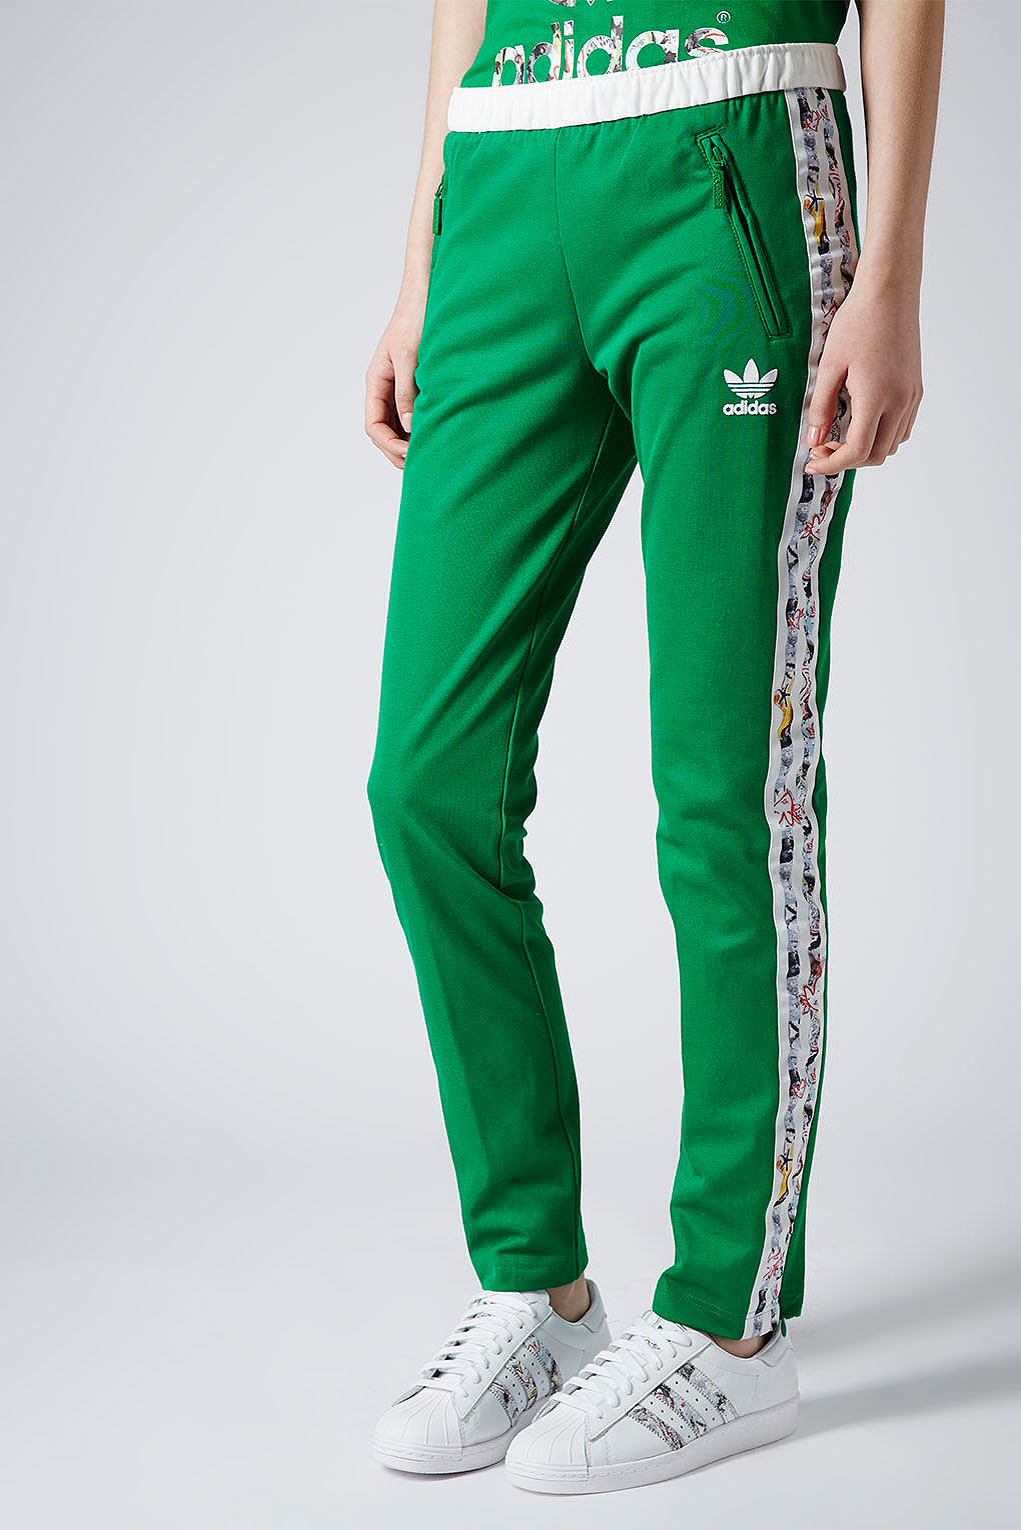 Topshop Tracksuit Bottoms By X Adidas Originals in Green | Lyst